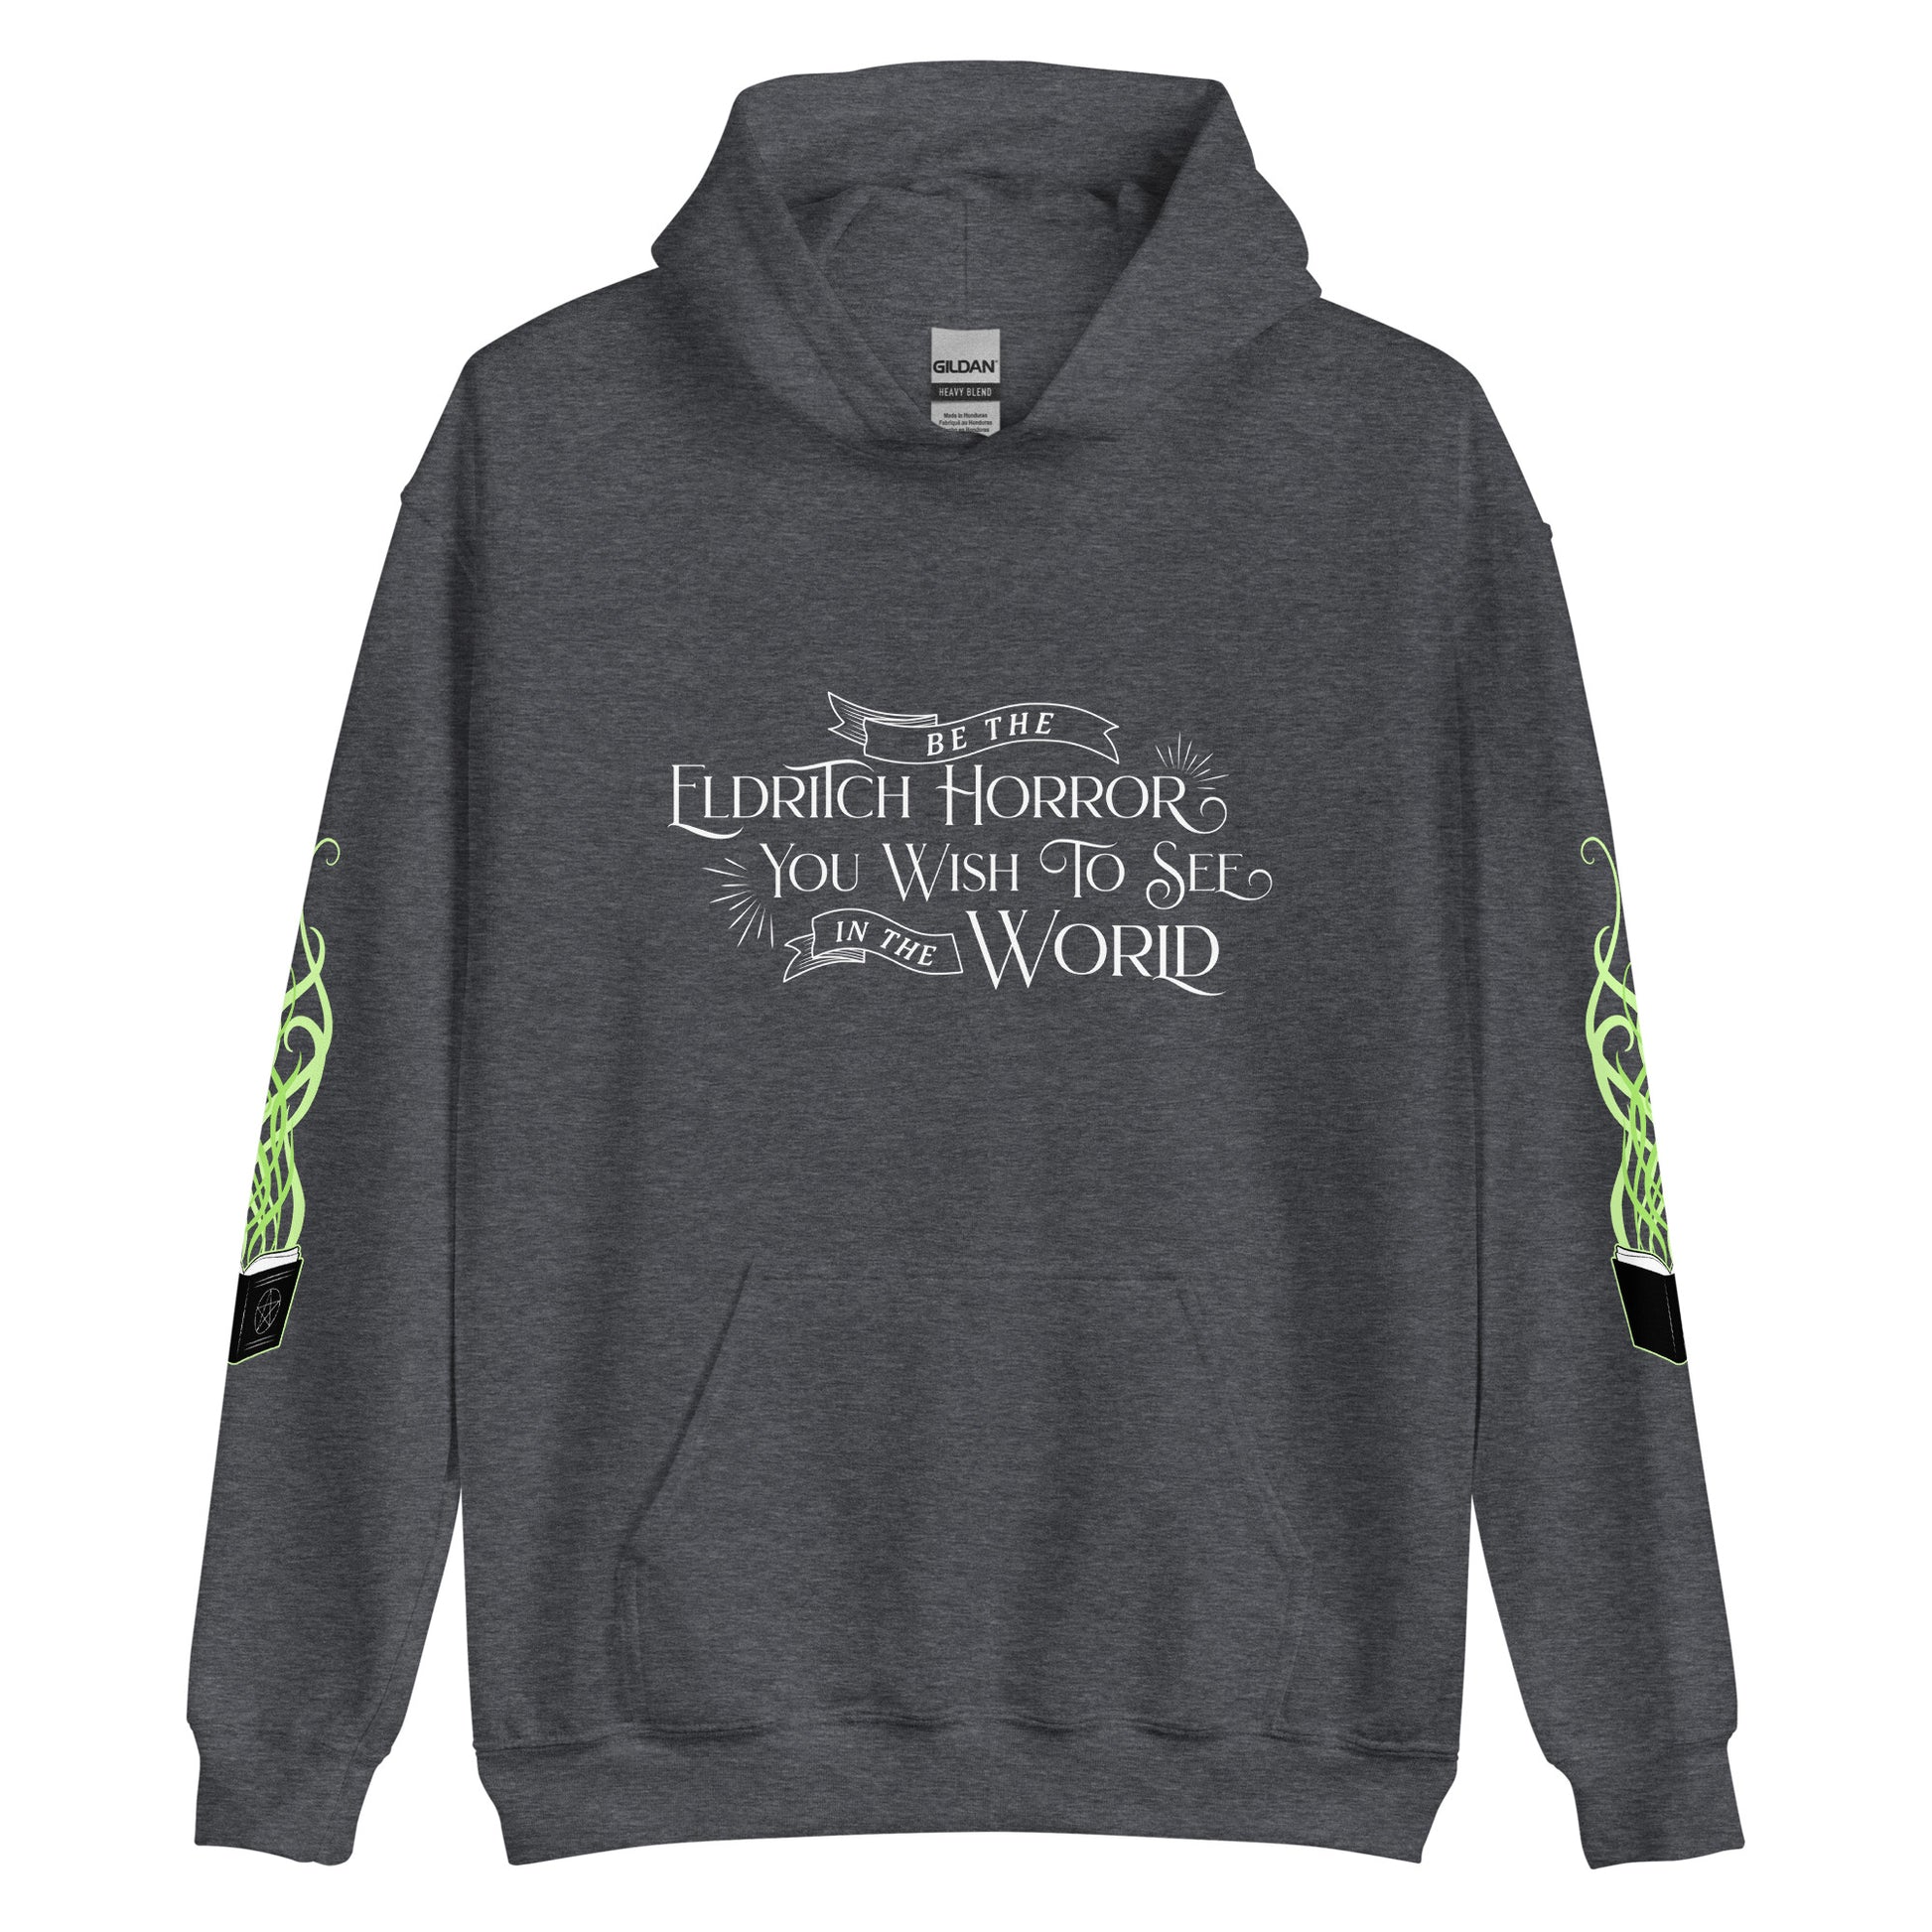 A dark heather grey hooded sweatshirt featuring white text in an old-fashioned style on the chest. The text reads "Be the Eldritch Horror You Wish To See In The World". On each sleeve is an illustration of a black spellbook with green magical tendrils reaching upward from the pages.